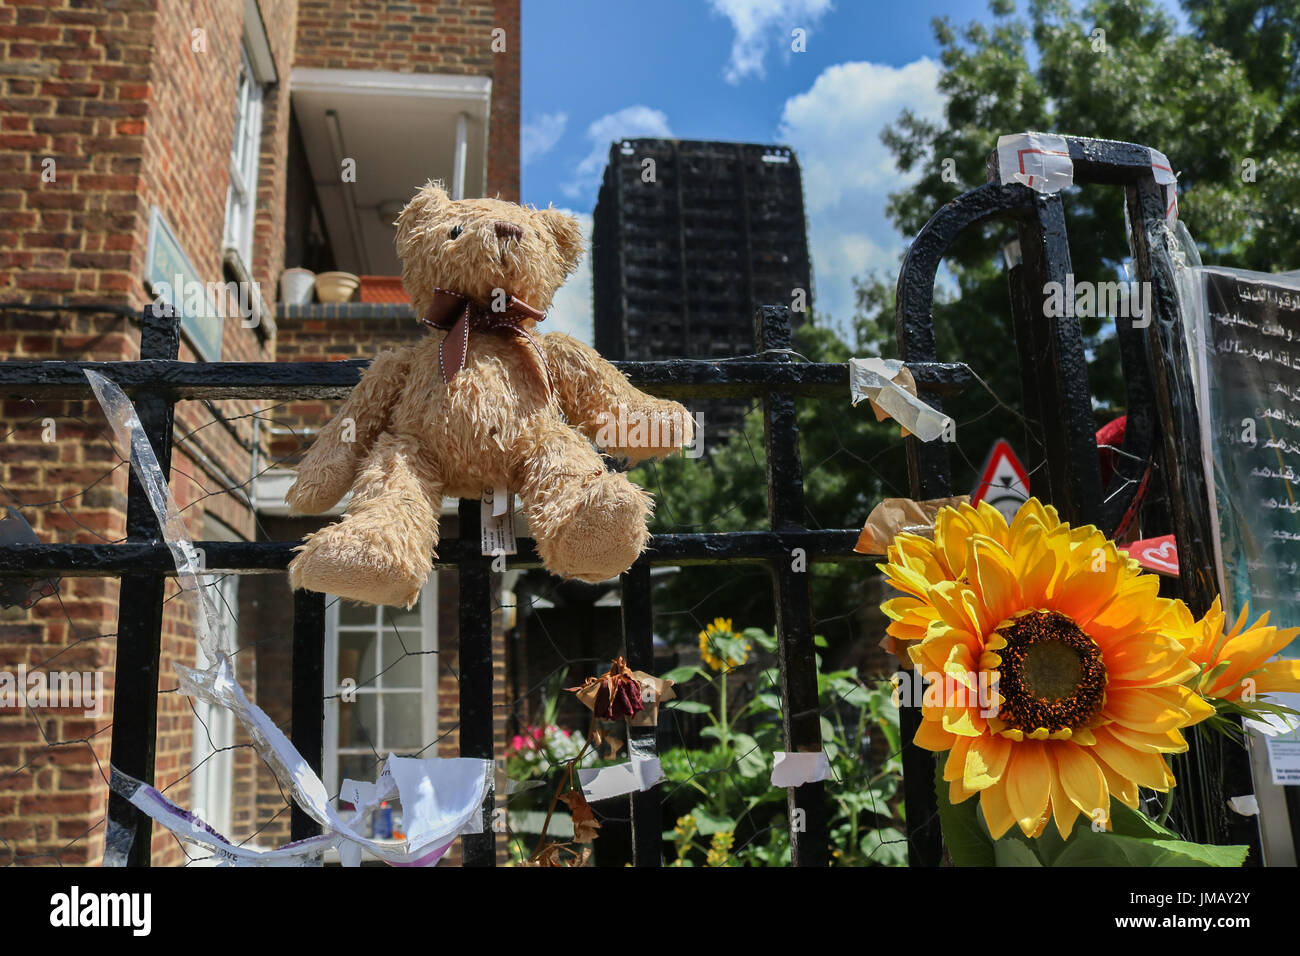 London UK. 27th July 2017. Plans are being discussed to demolish the Grenfell tower which was engulfed in a massive fire by the end of 2018 once the forensic investigation  for victims of the fire is completed. The community will then decide what is to replace the demolished  building in the future Credit: amer ghazzal/Alamy Live News Stock Photo